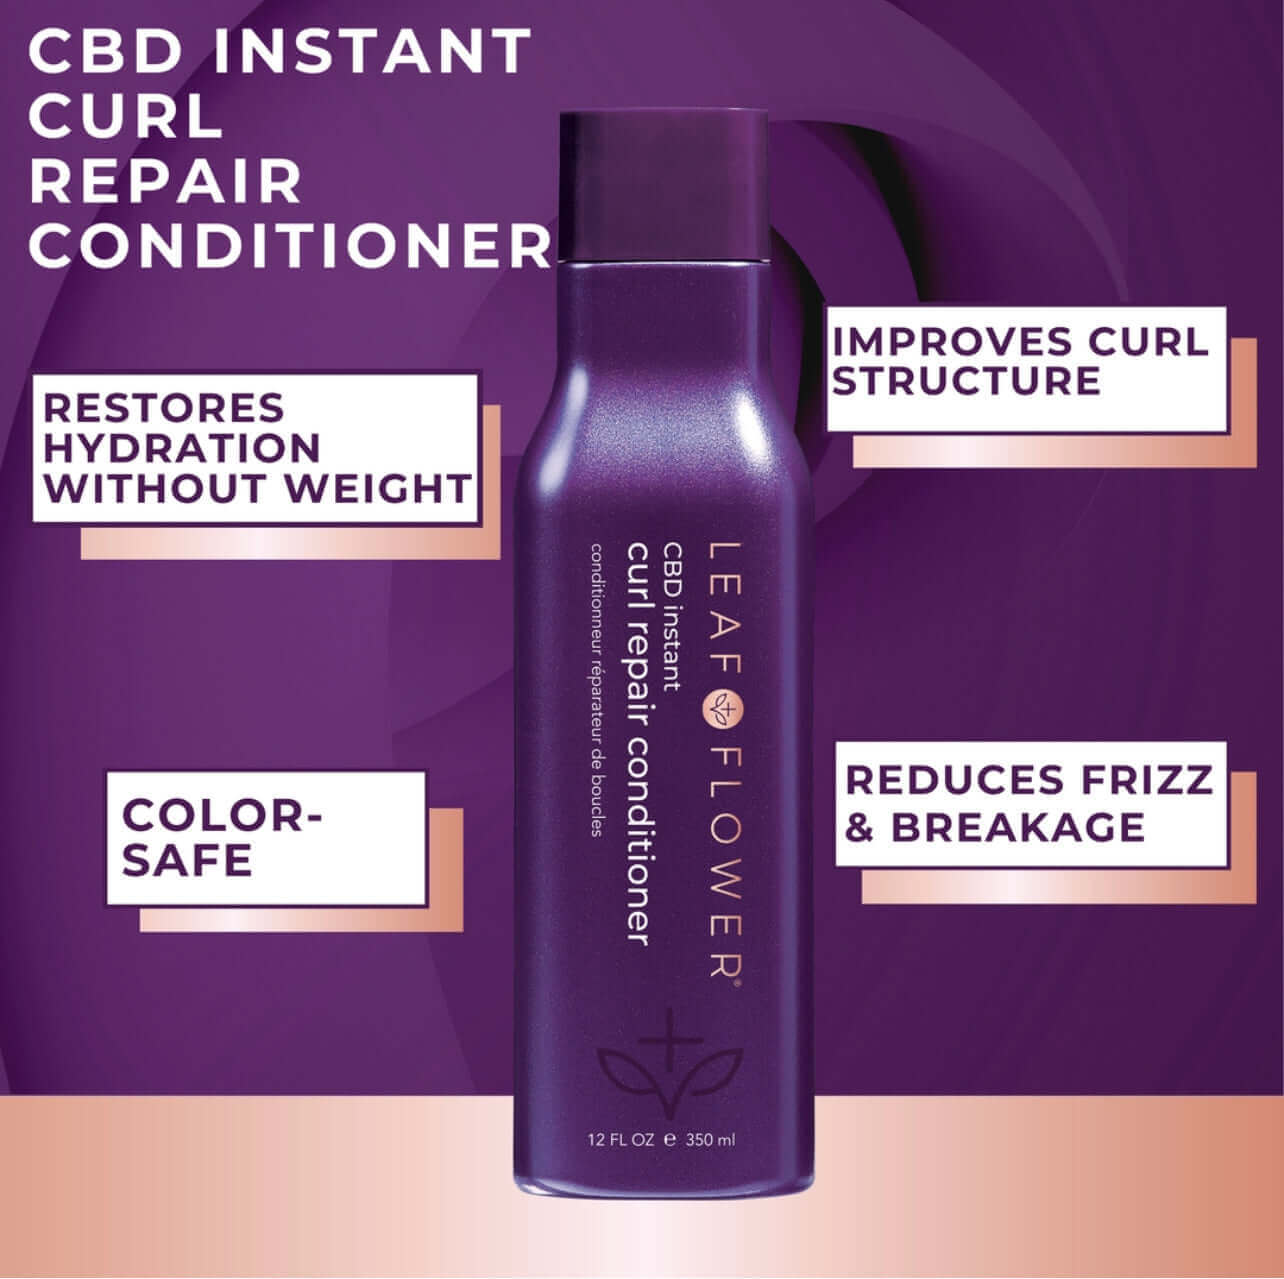 Leaf & Flower Instant Curl Repair Conditioner is a hydrating conditioner that effectively repairs curls.